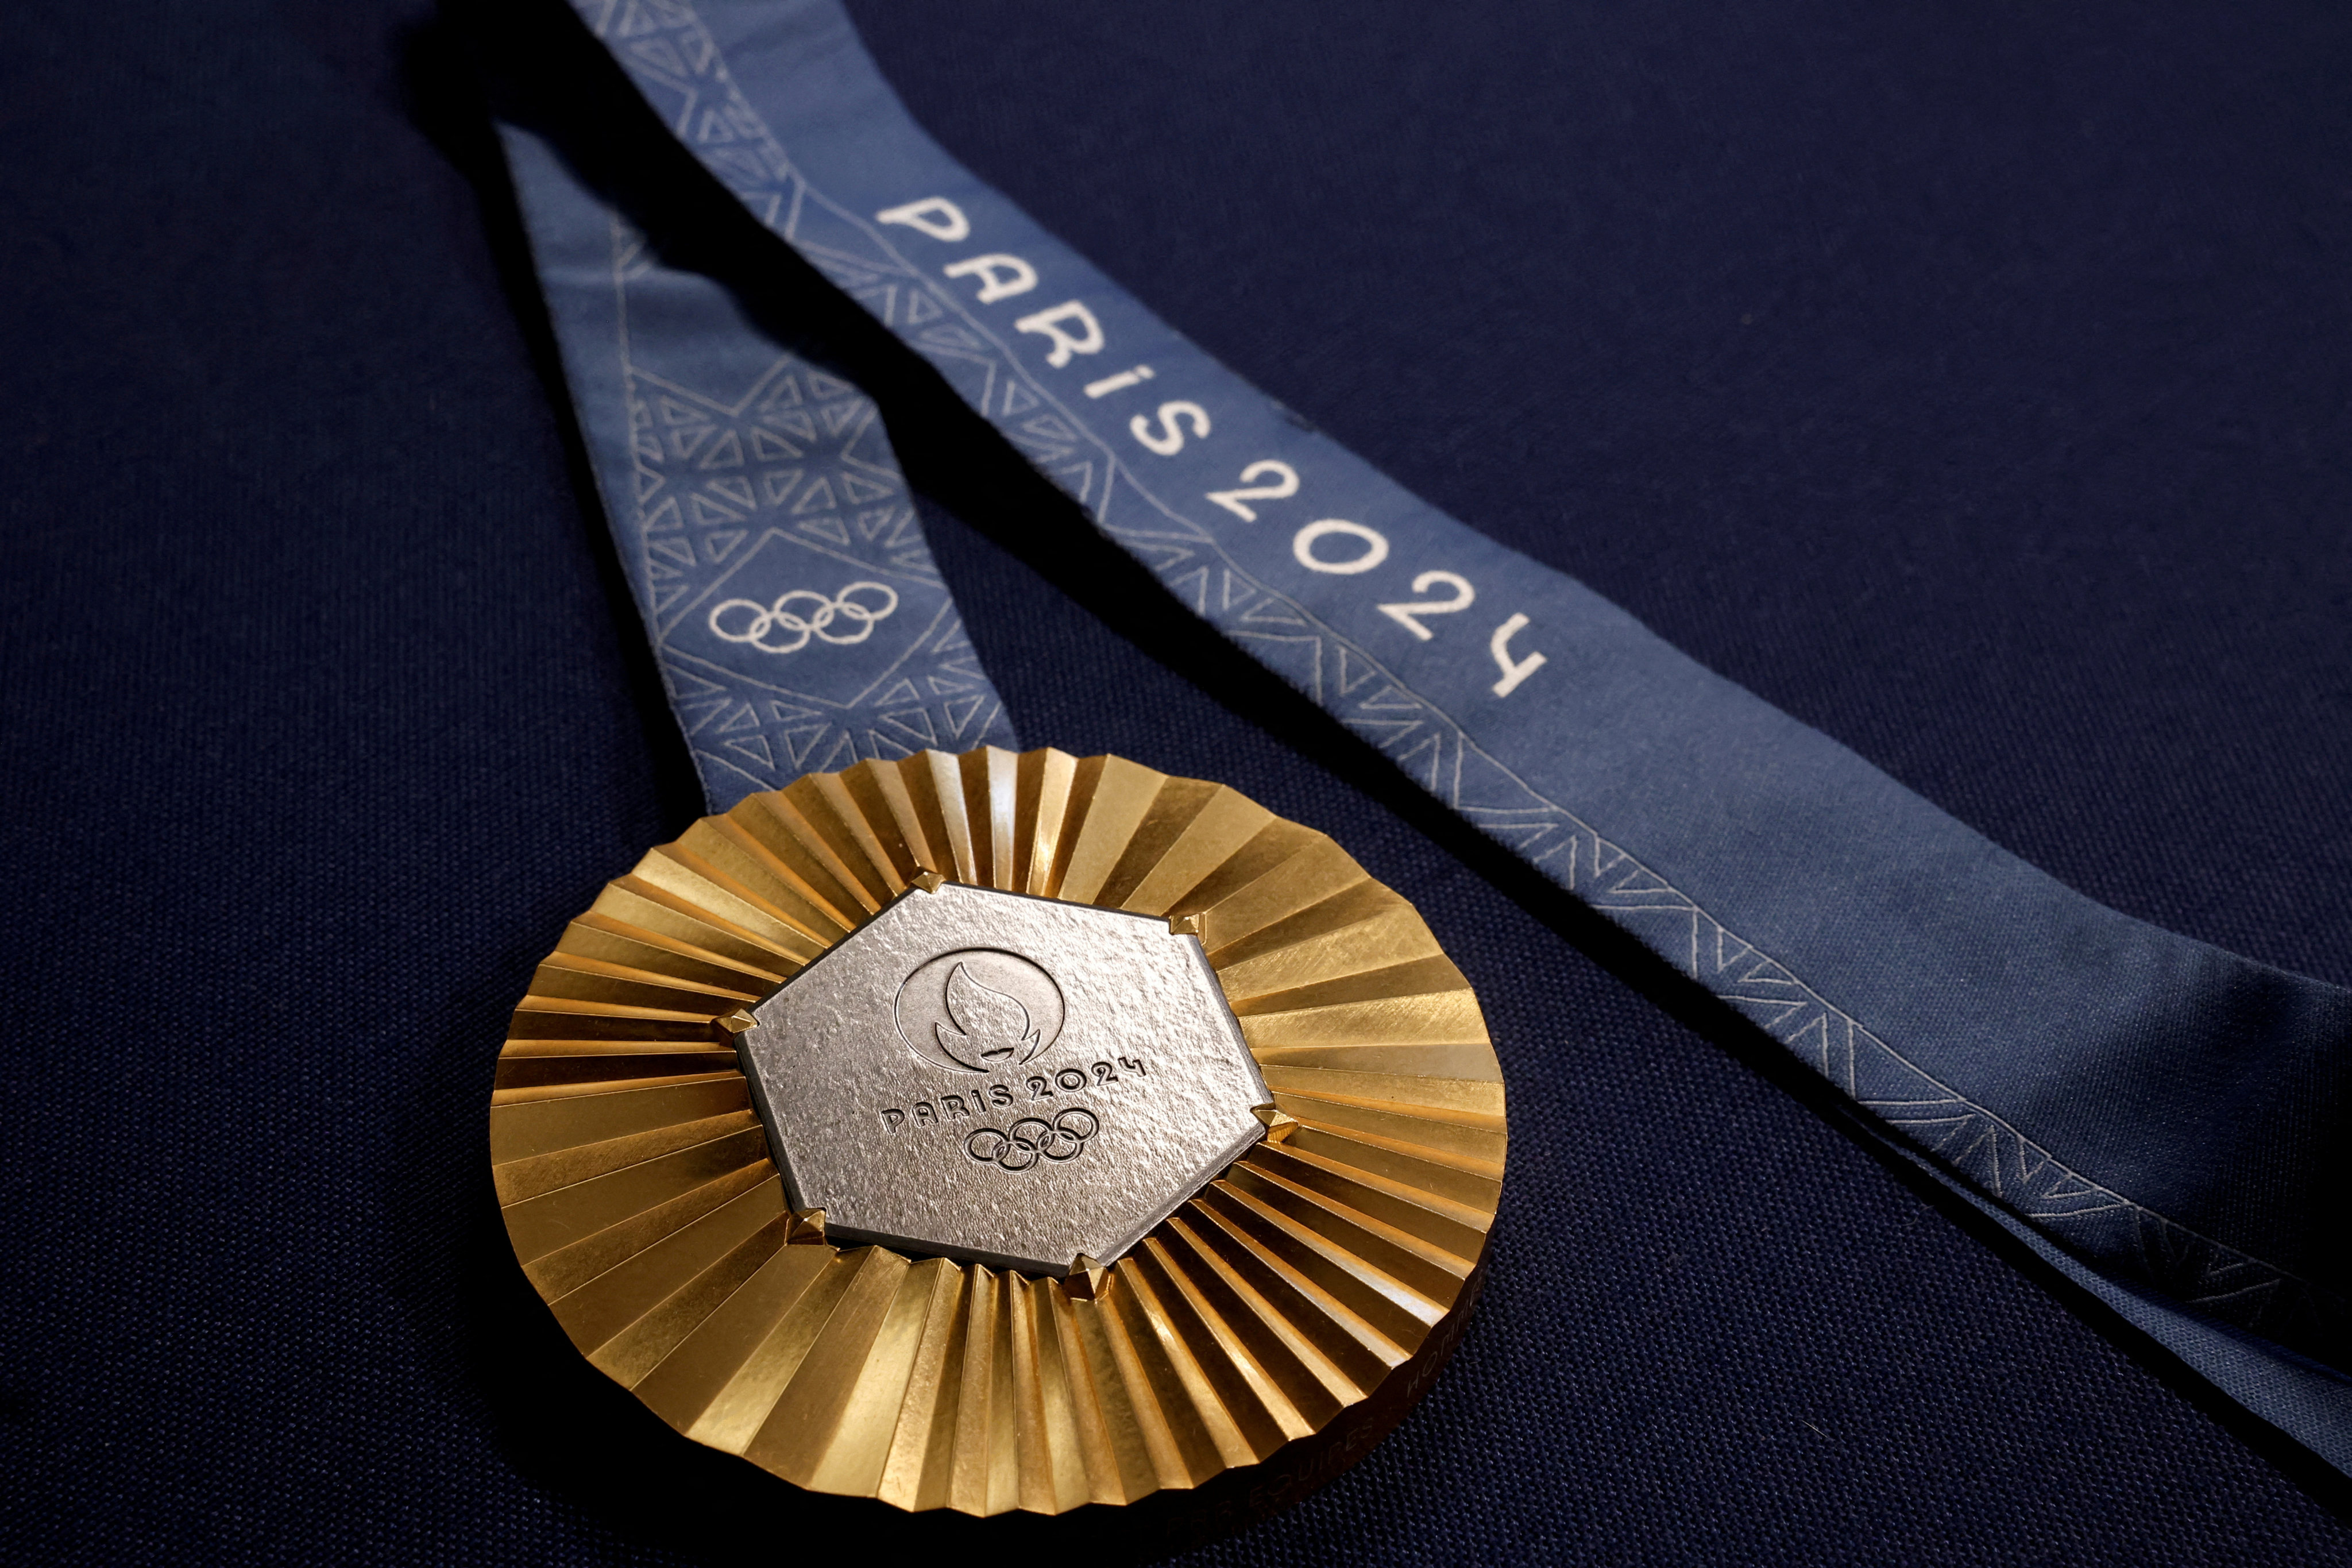 Britain, Australia and Japan will win the fourth highest number of gold medals with 13 apiece, Gracenote predicts.Photo: Reuters